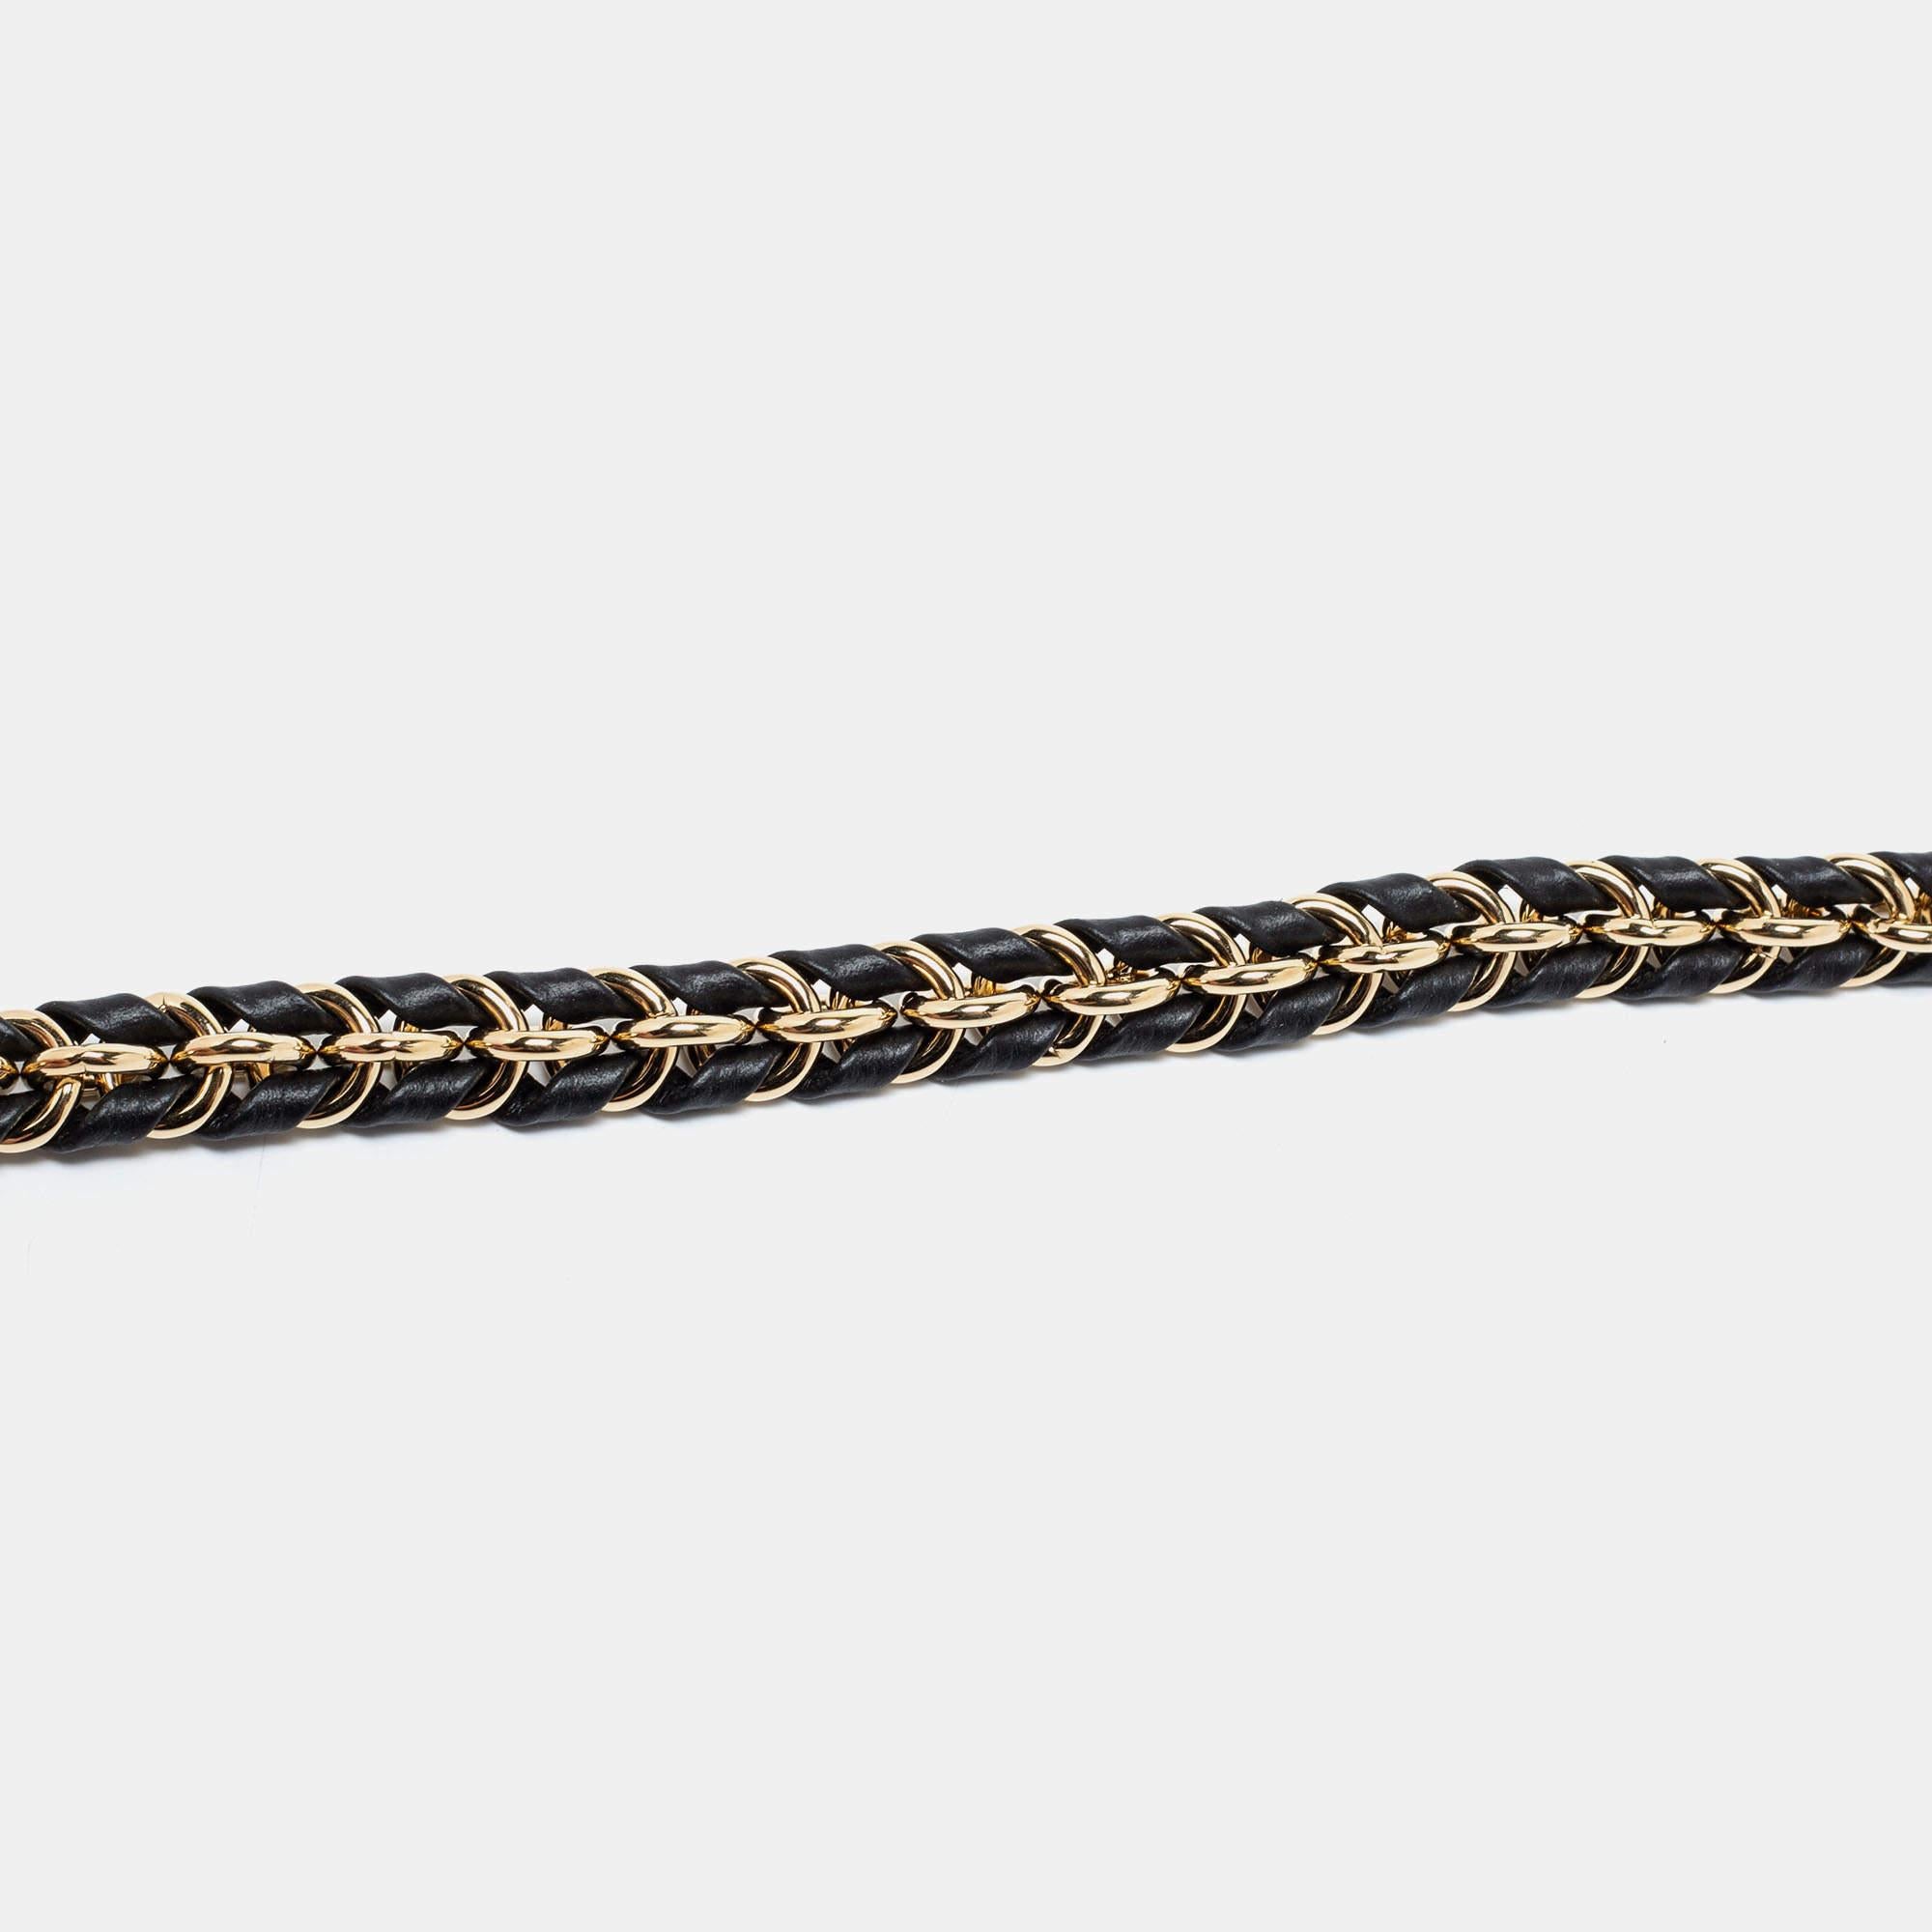 Louis Vuitton's shoulder strap is one of the most useful accessories with a touch of luxury. The creation is a chain link strap woven with black leather and is complete with two gold-tone clasps for you to attach it to your bags.

